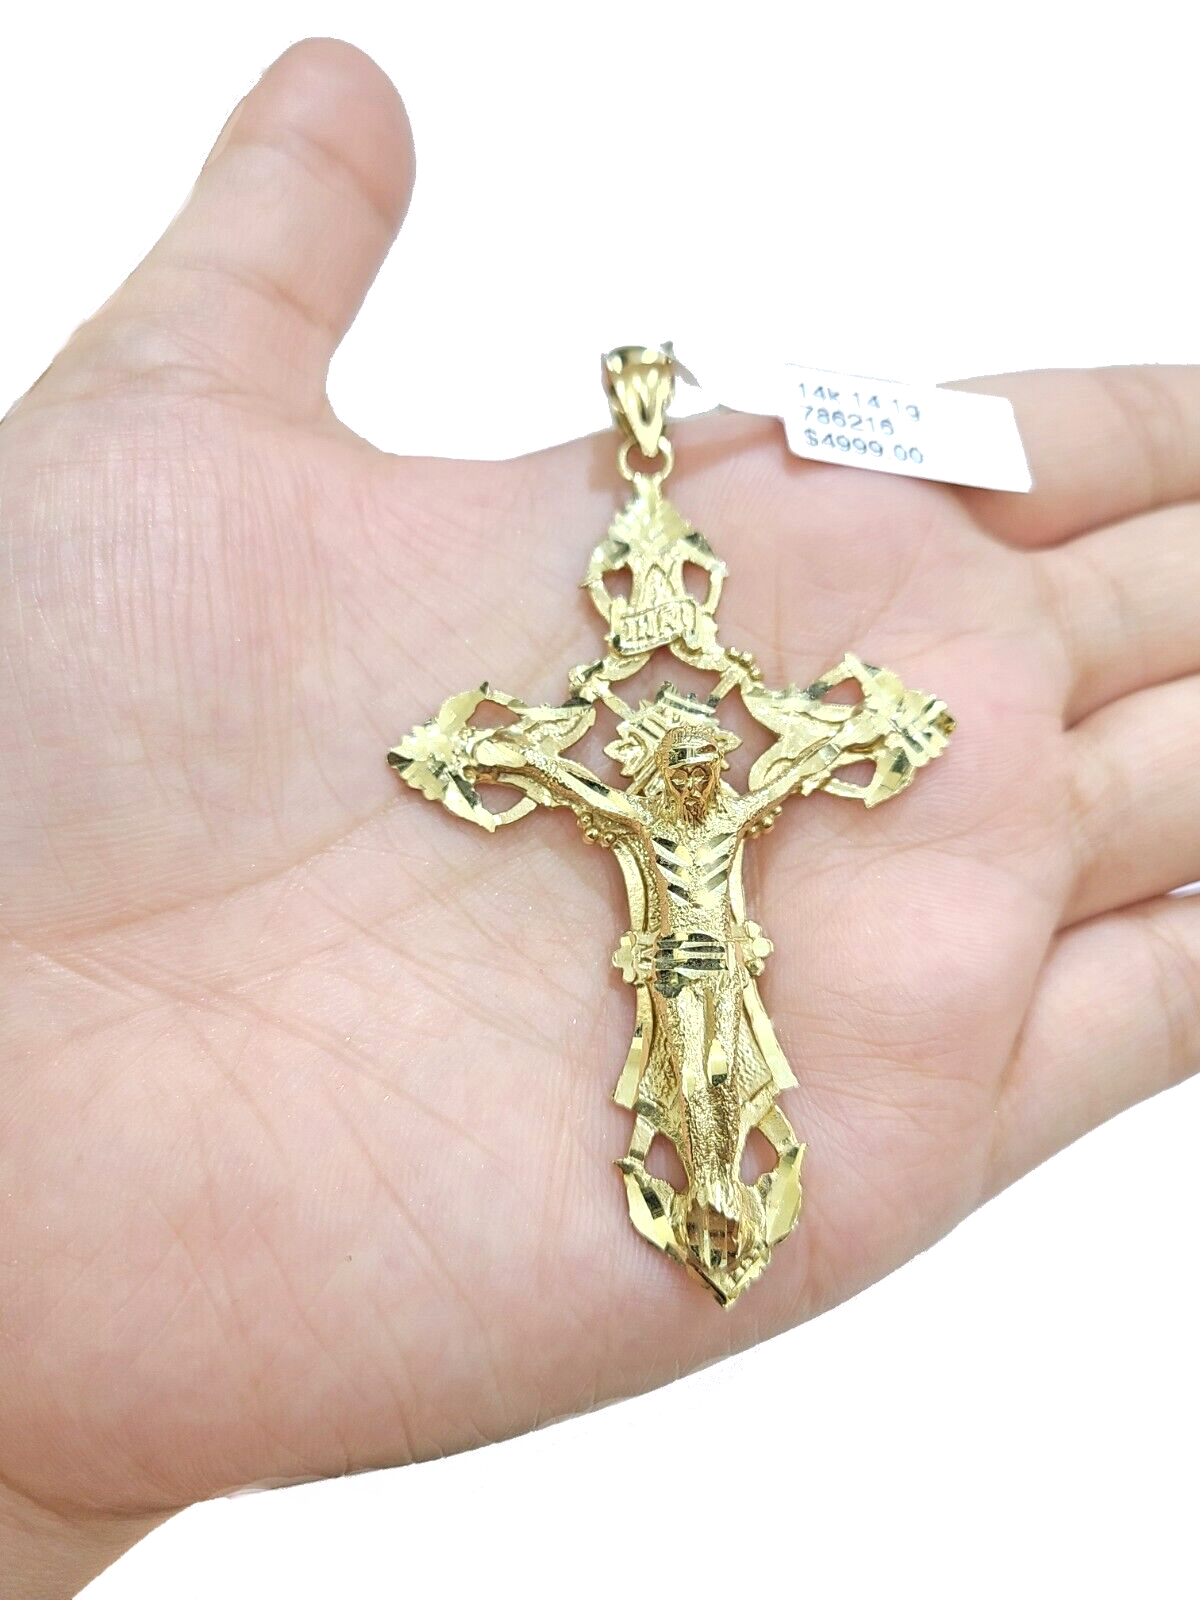 Real 14k Yellow Gold Rope Chain 24'' Necklace Jesus Crucifix Cross Charm Pendant